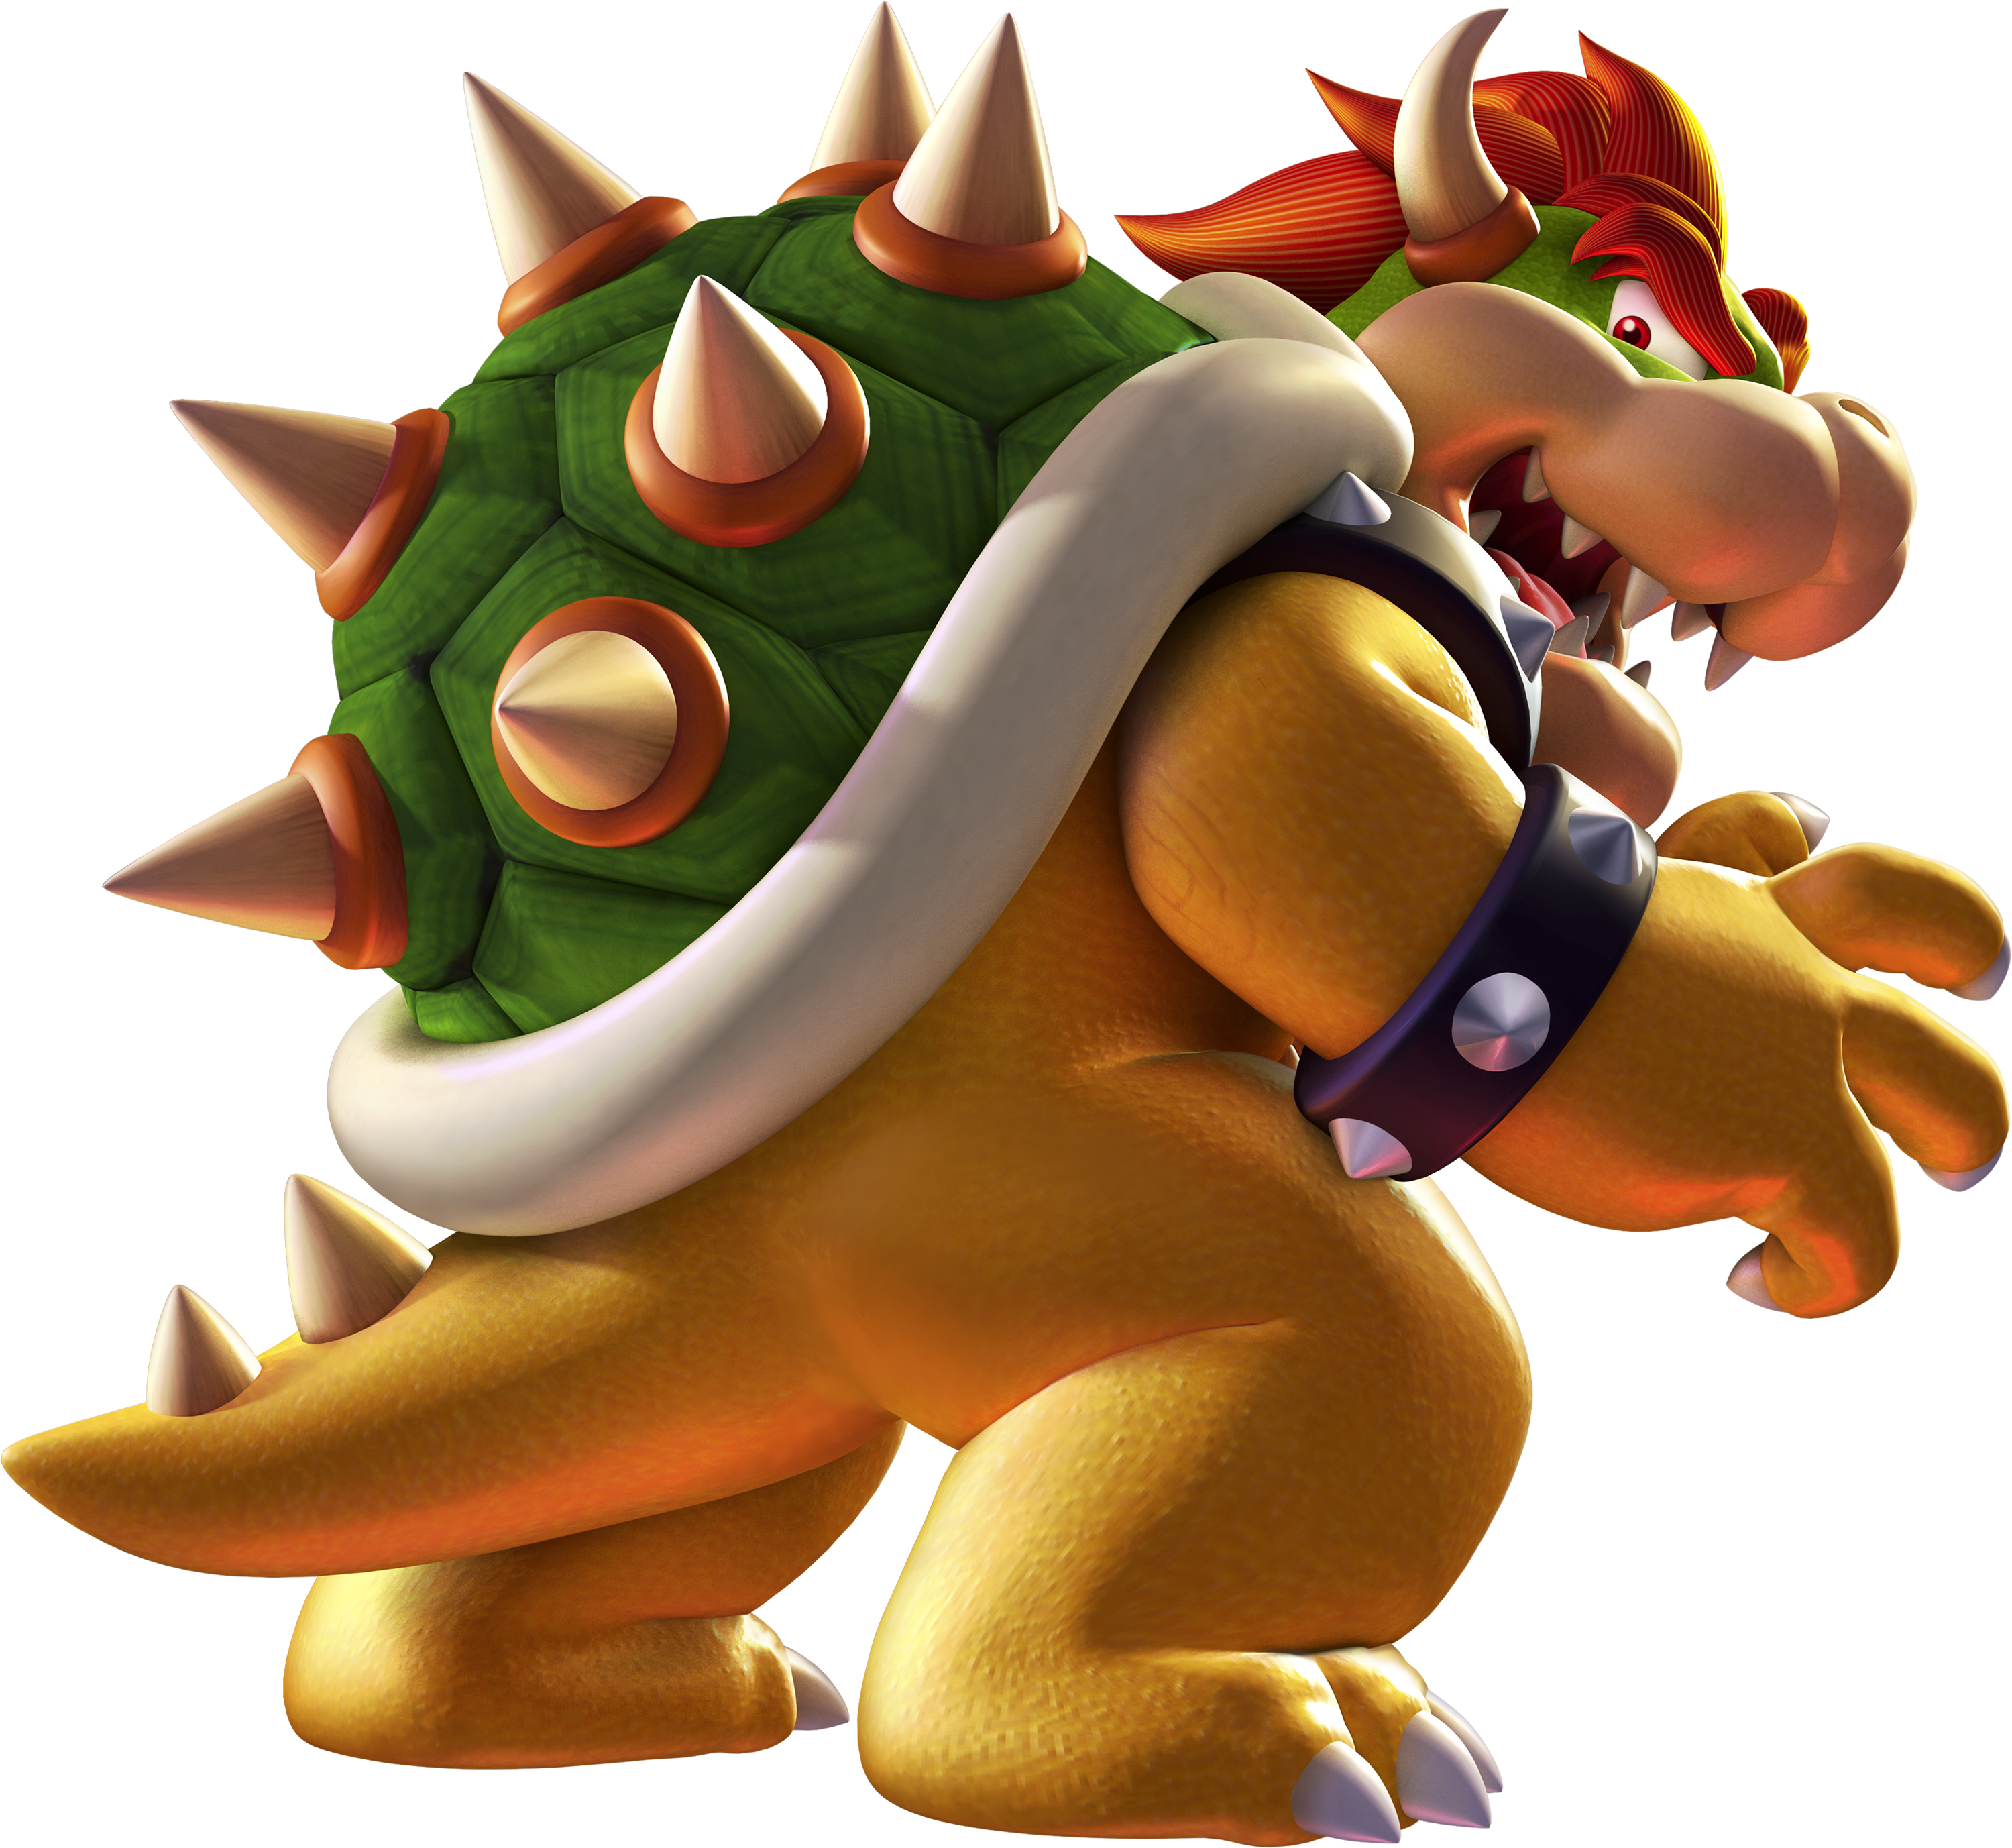 Fire Breathing Dragon Gif Download - Bowser Mario (3000x2755) .